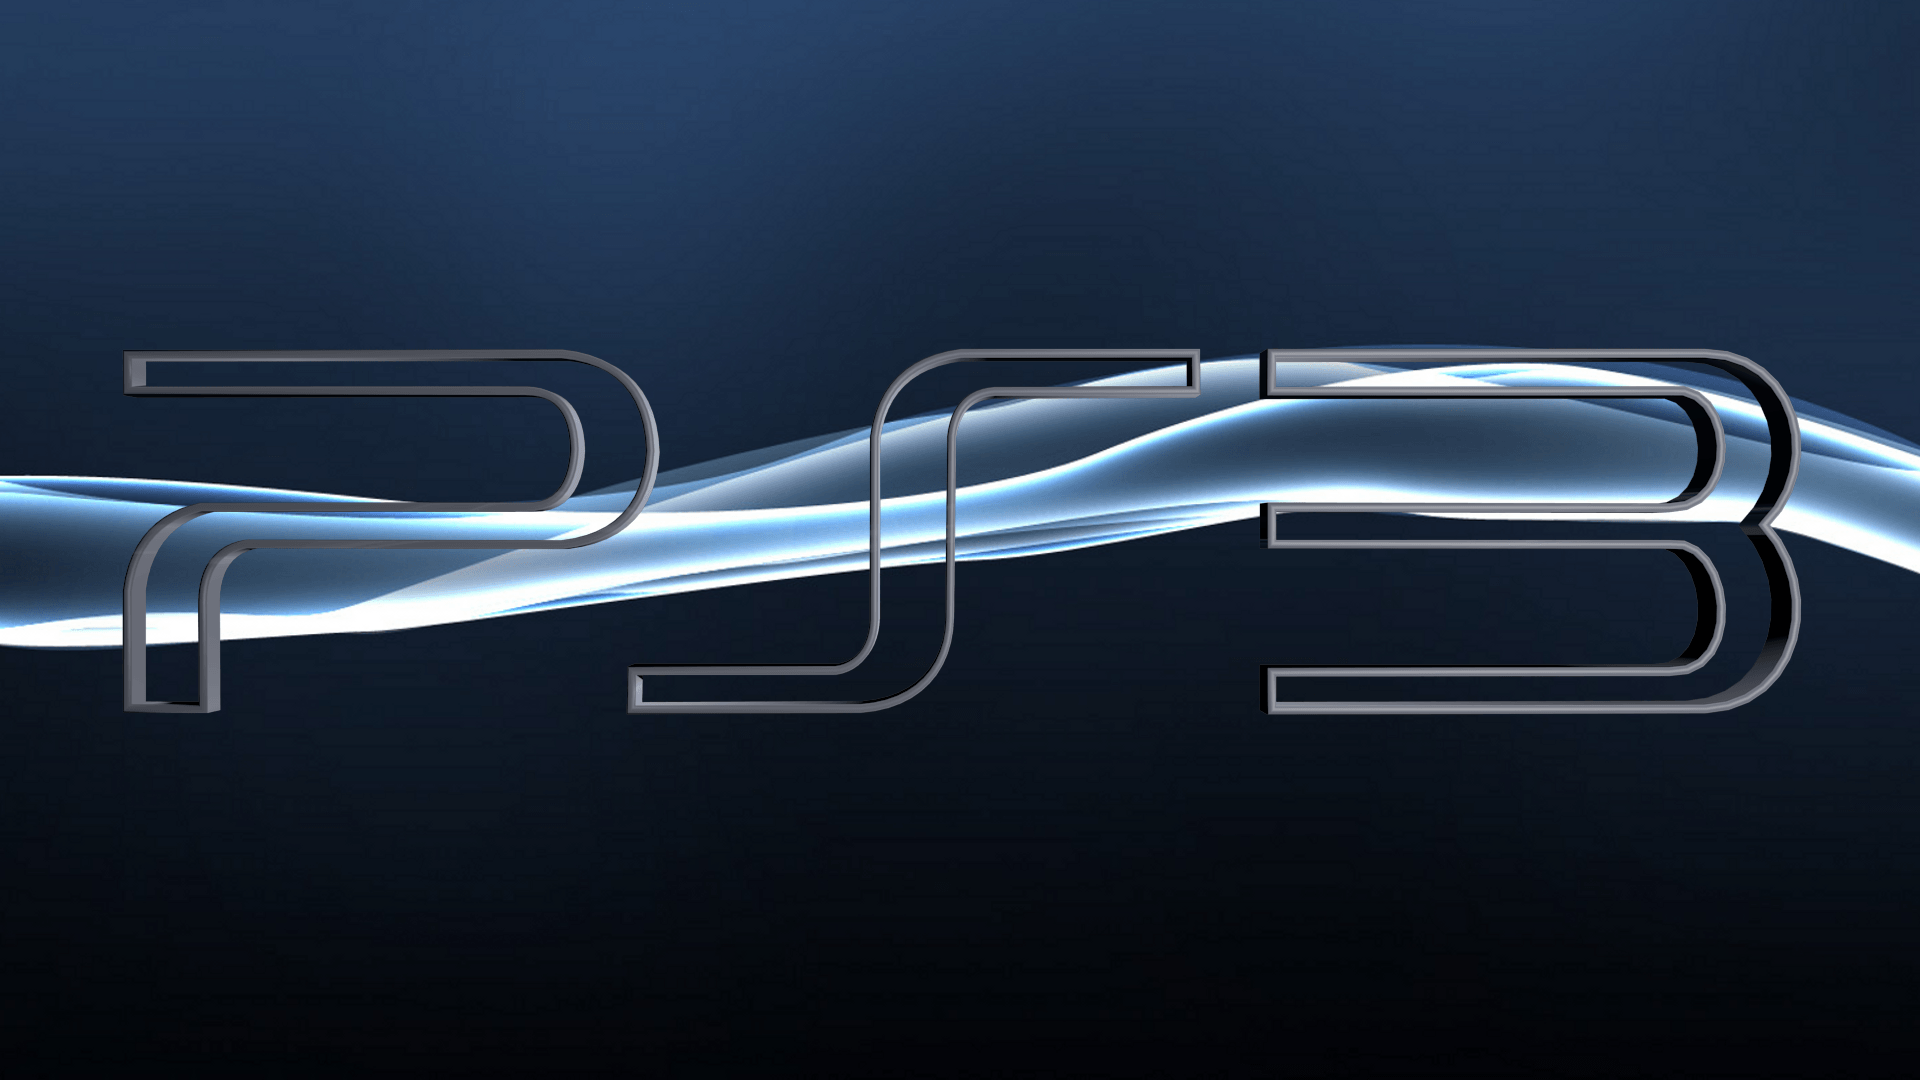 Ps3 Logo Picture